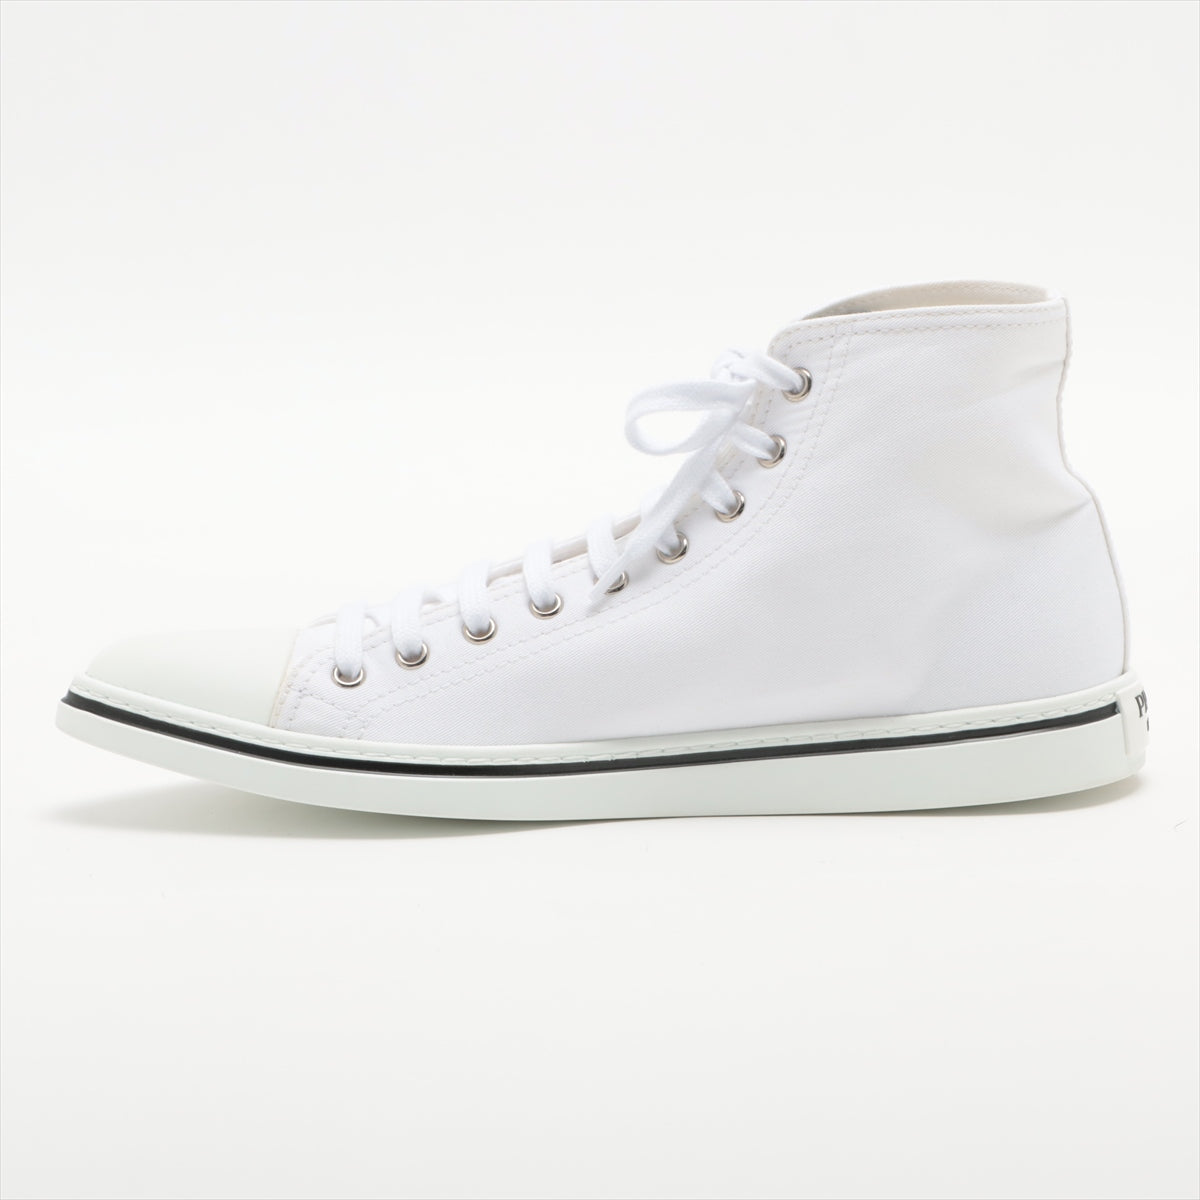 Prada canvas High-top Sneakers 6 1/2 Men's White 2TG177 Pointed toe